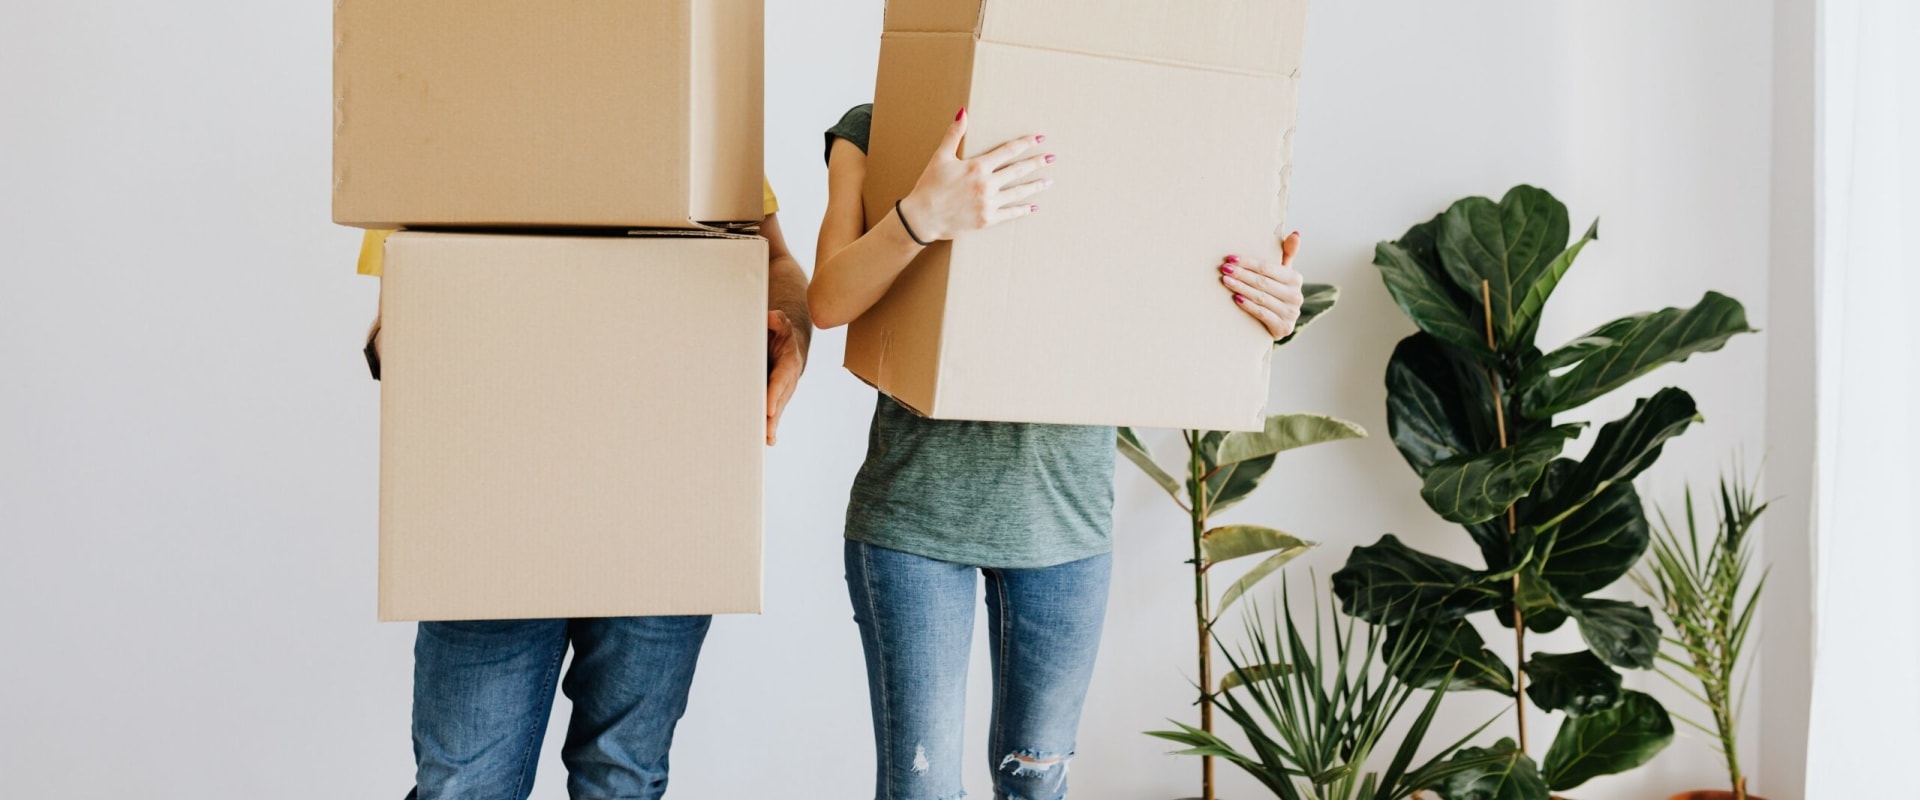 The Best Time to Hire Movers: Insider Tips for Saving Money